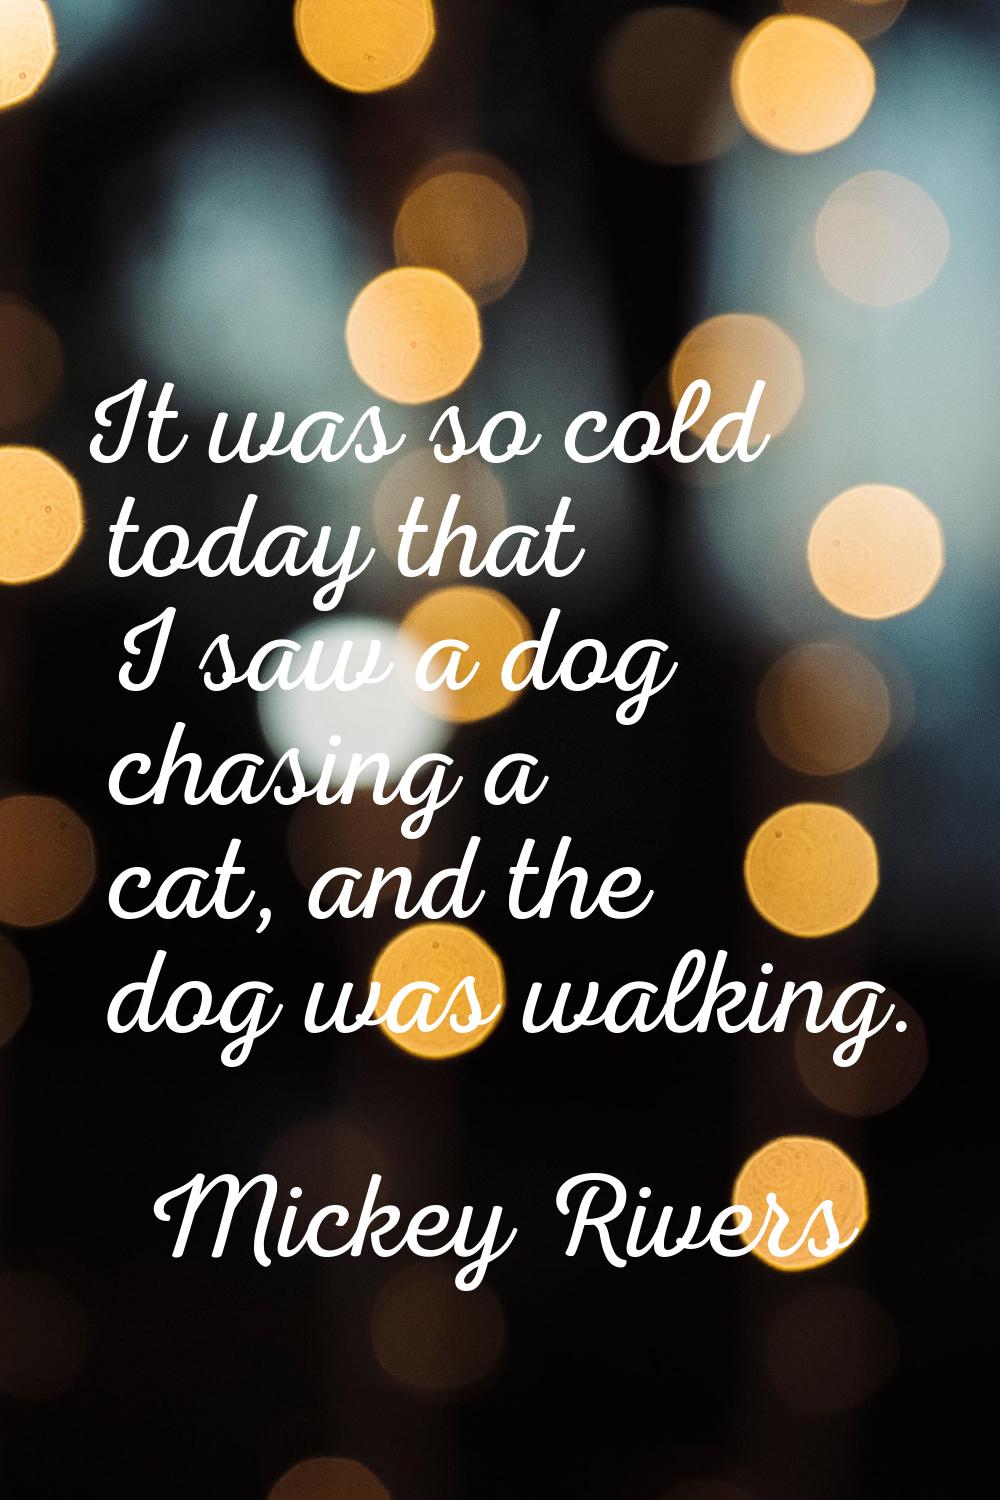 It was so cold today that I saw a dog chasing a cat, and the dog was walking.